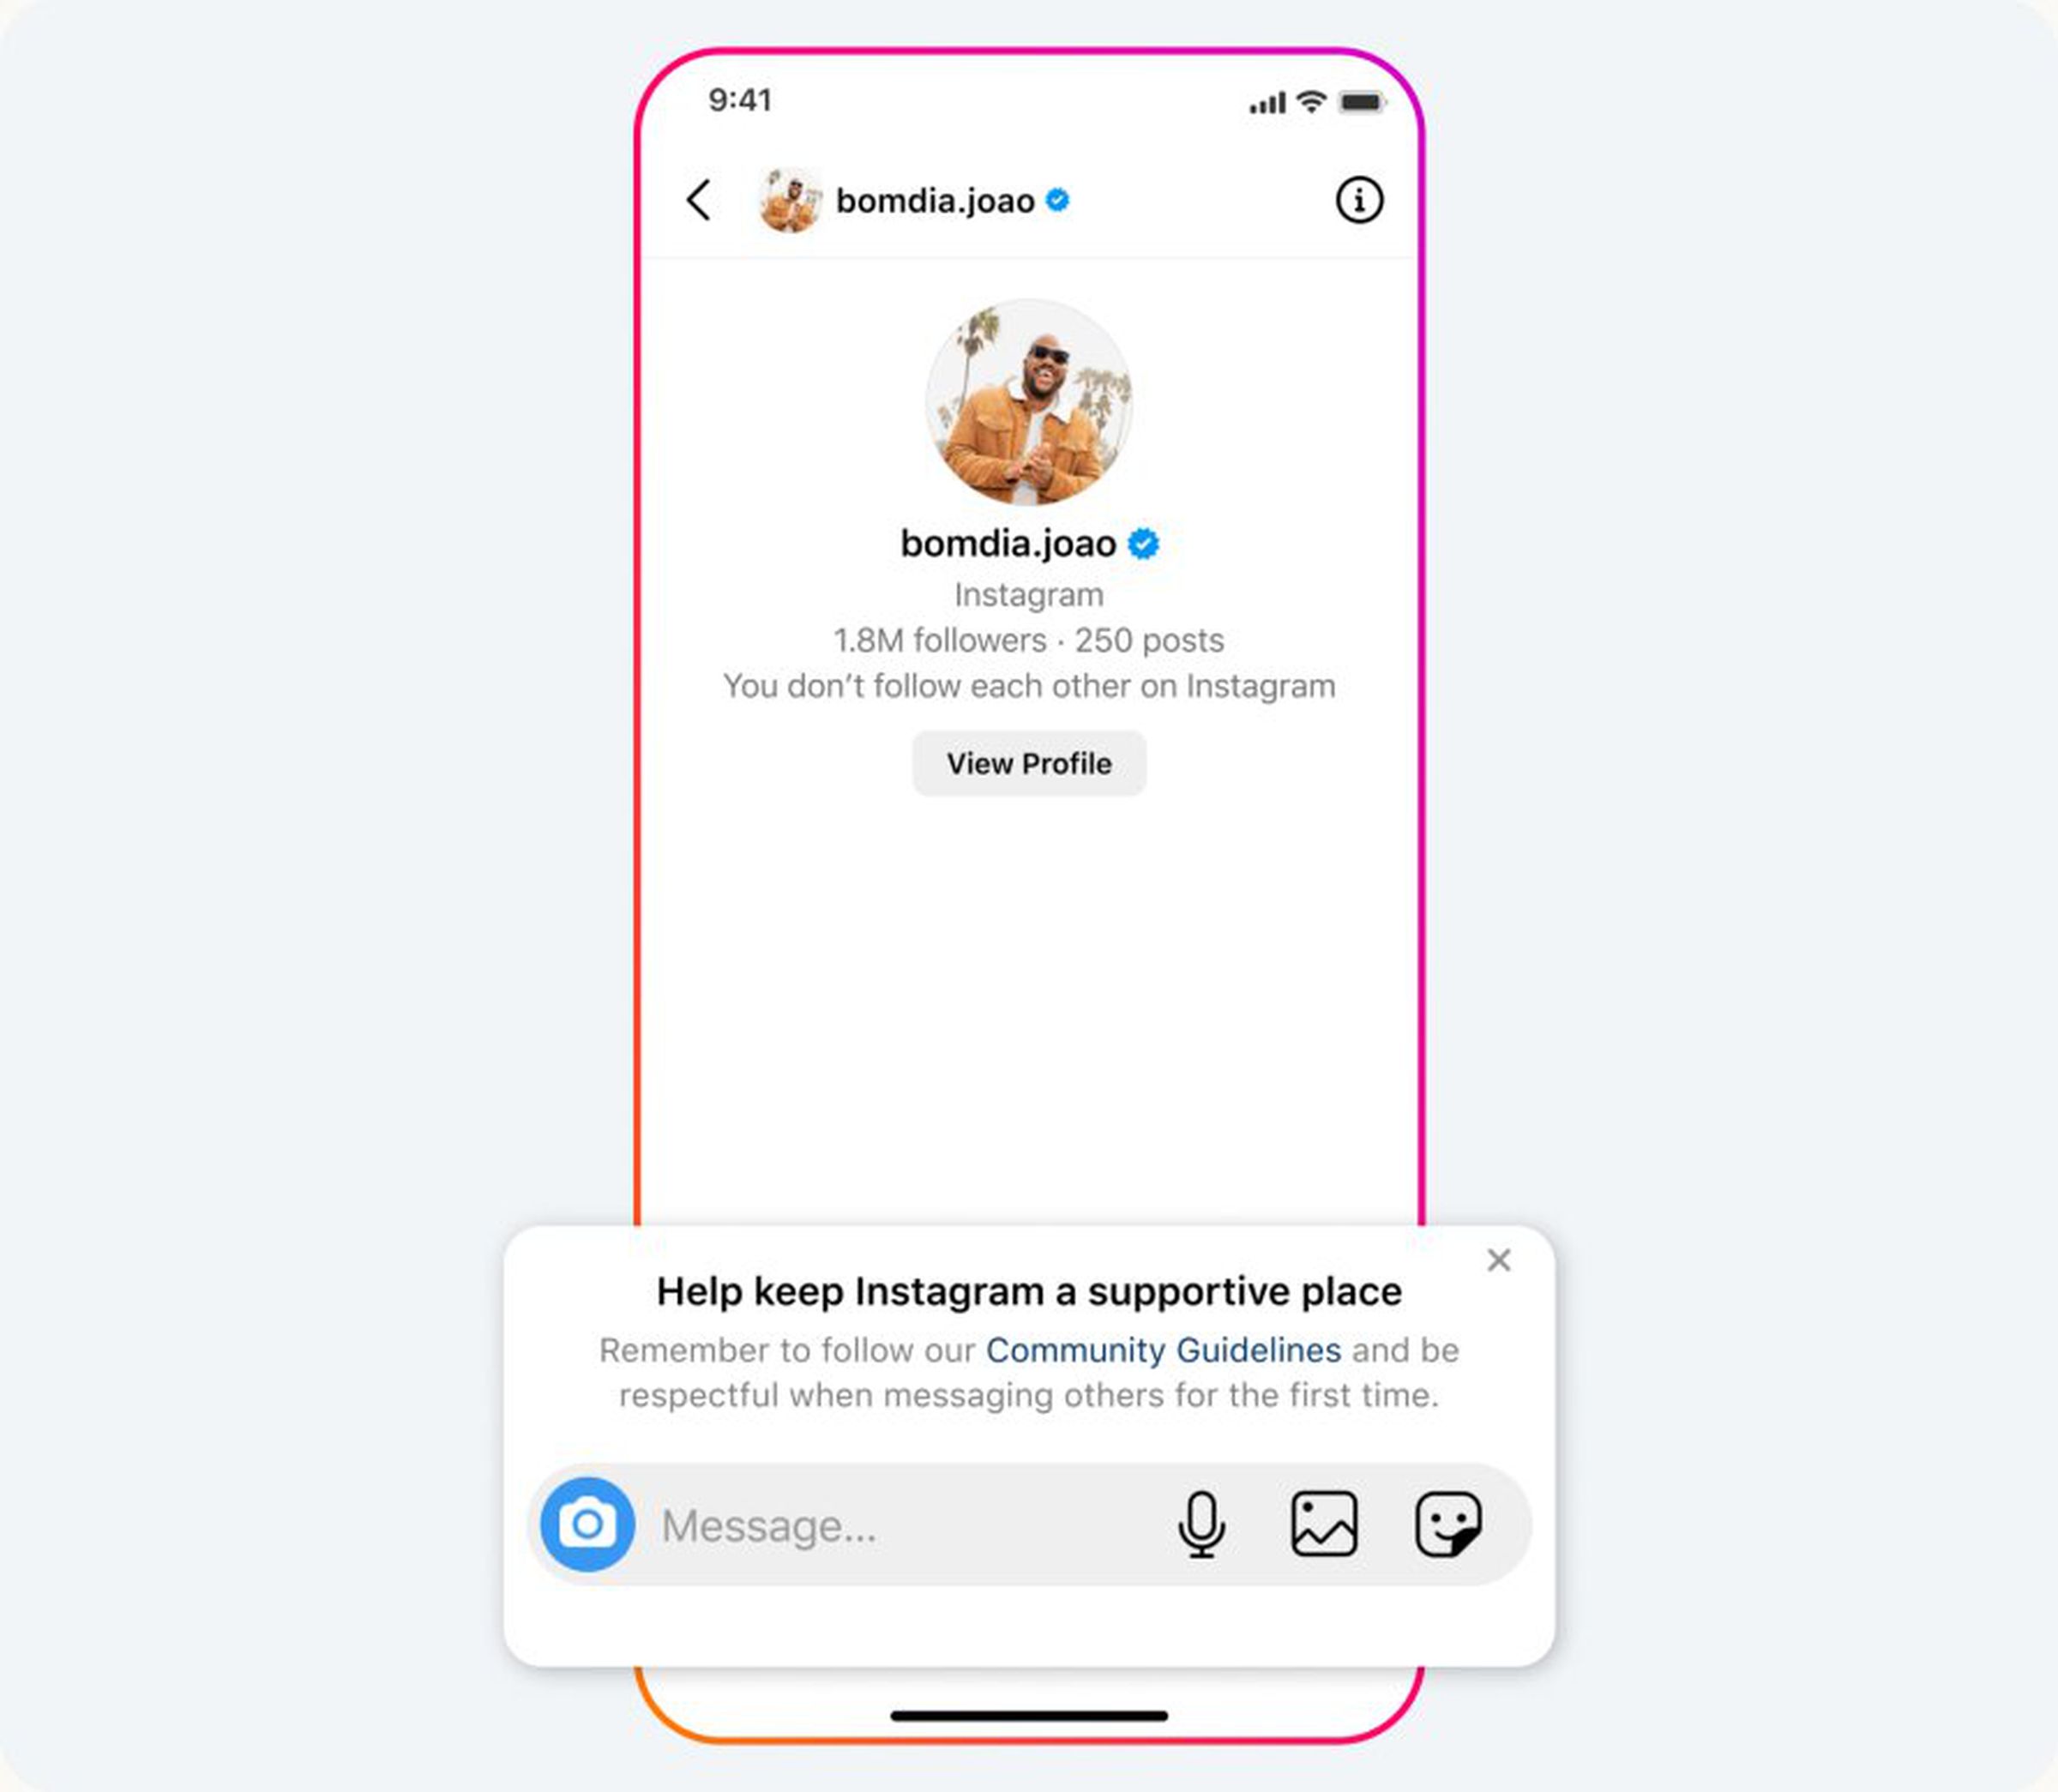 A mobile device displaying the start of a new direct message with a verified user. A message is asking the user to follow community guidelines and be respectful.